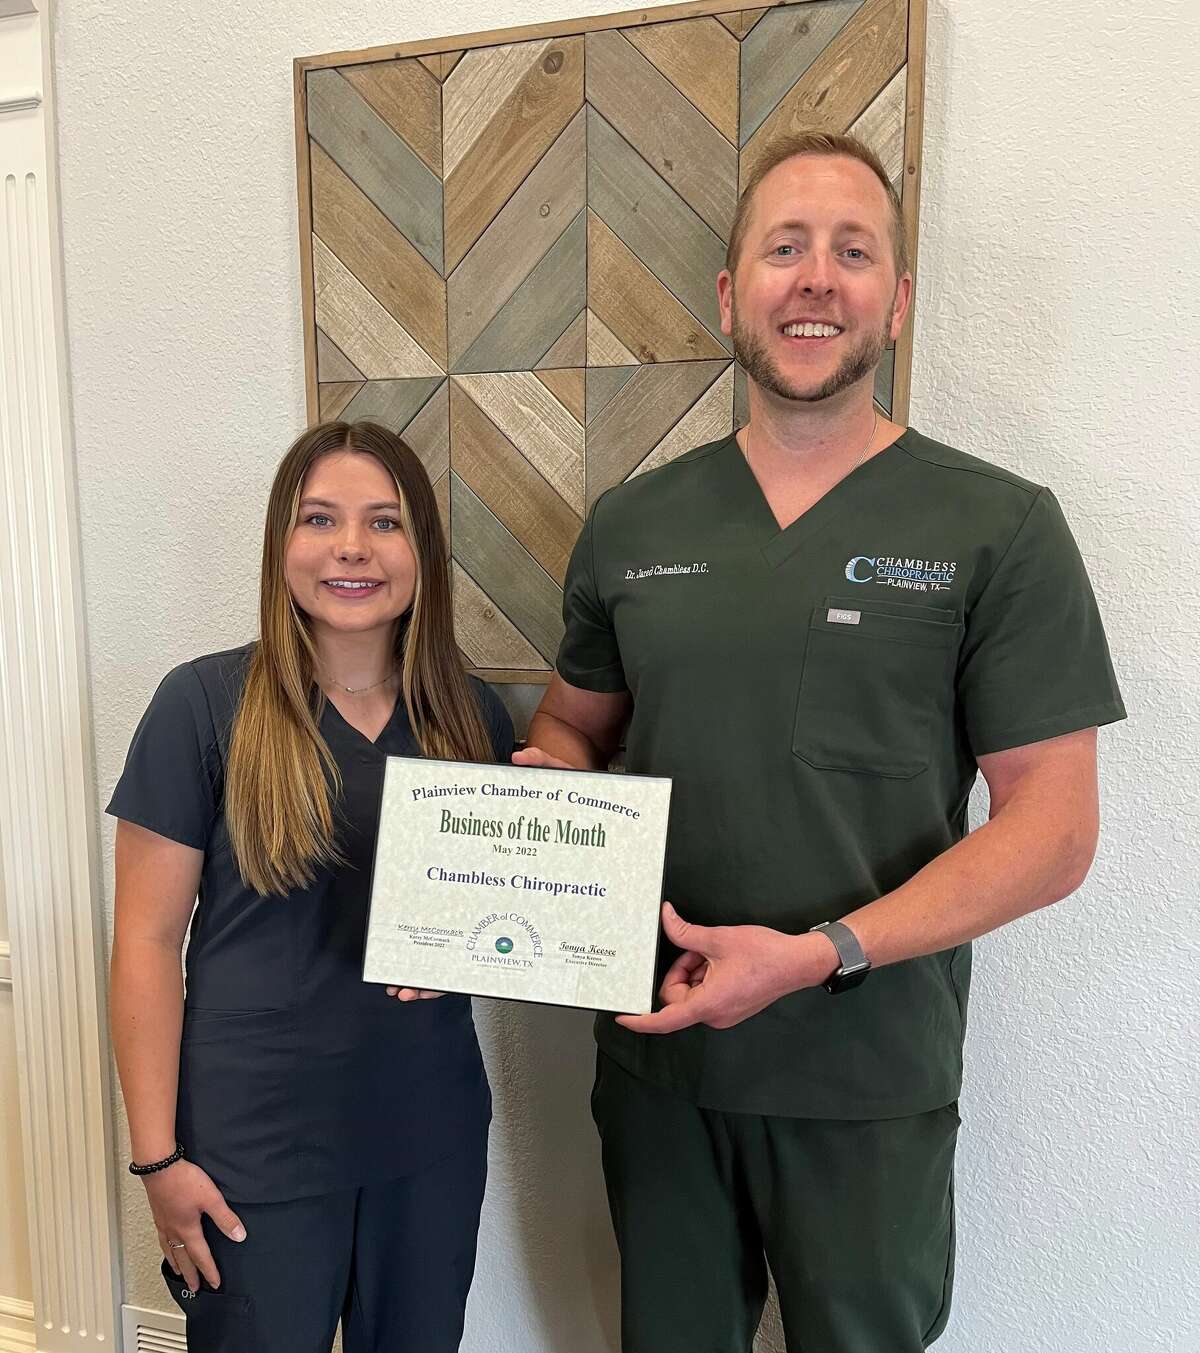 Chambless Chiropractic was named business of the month for May 2022.